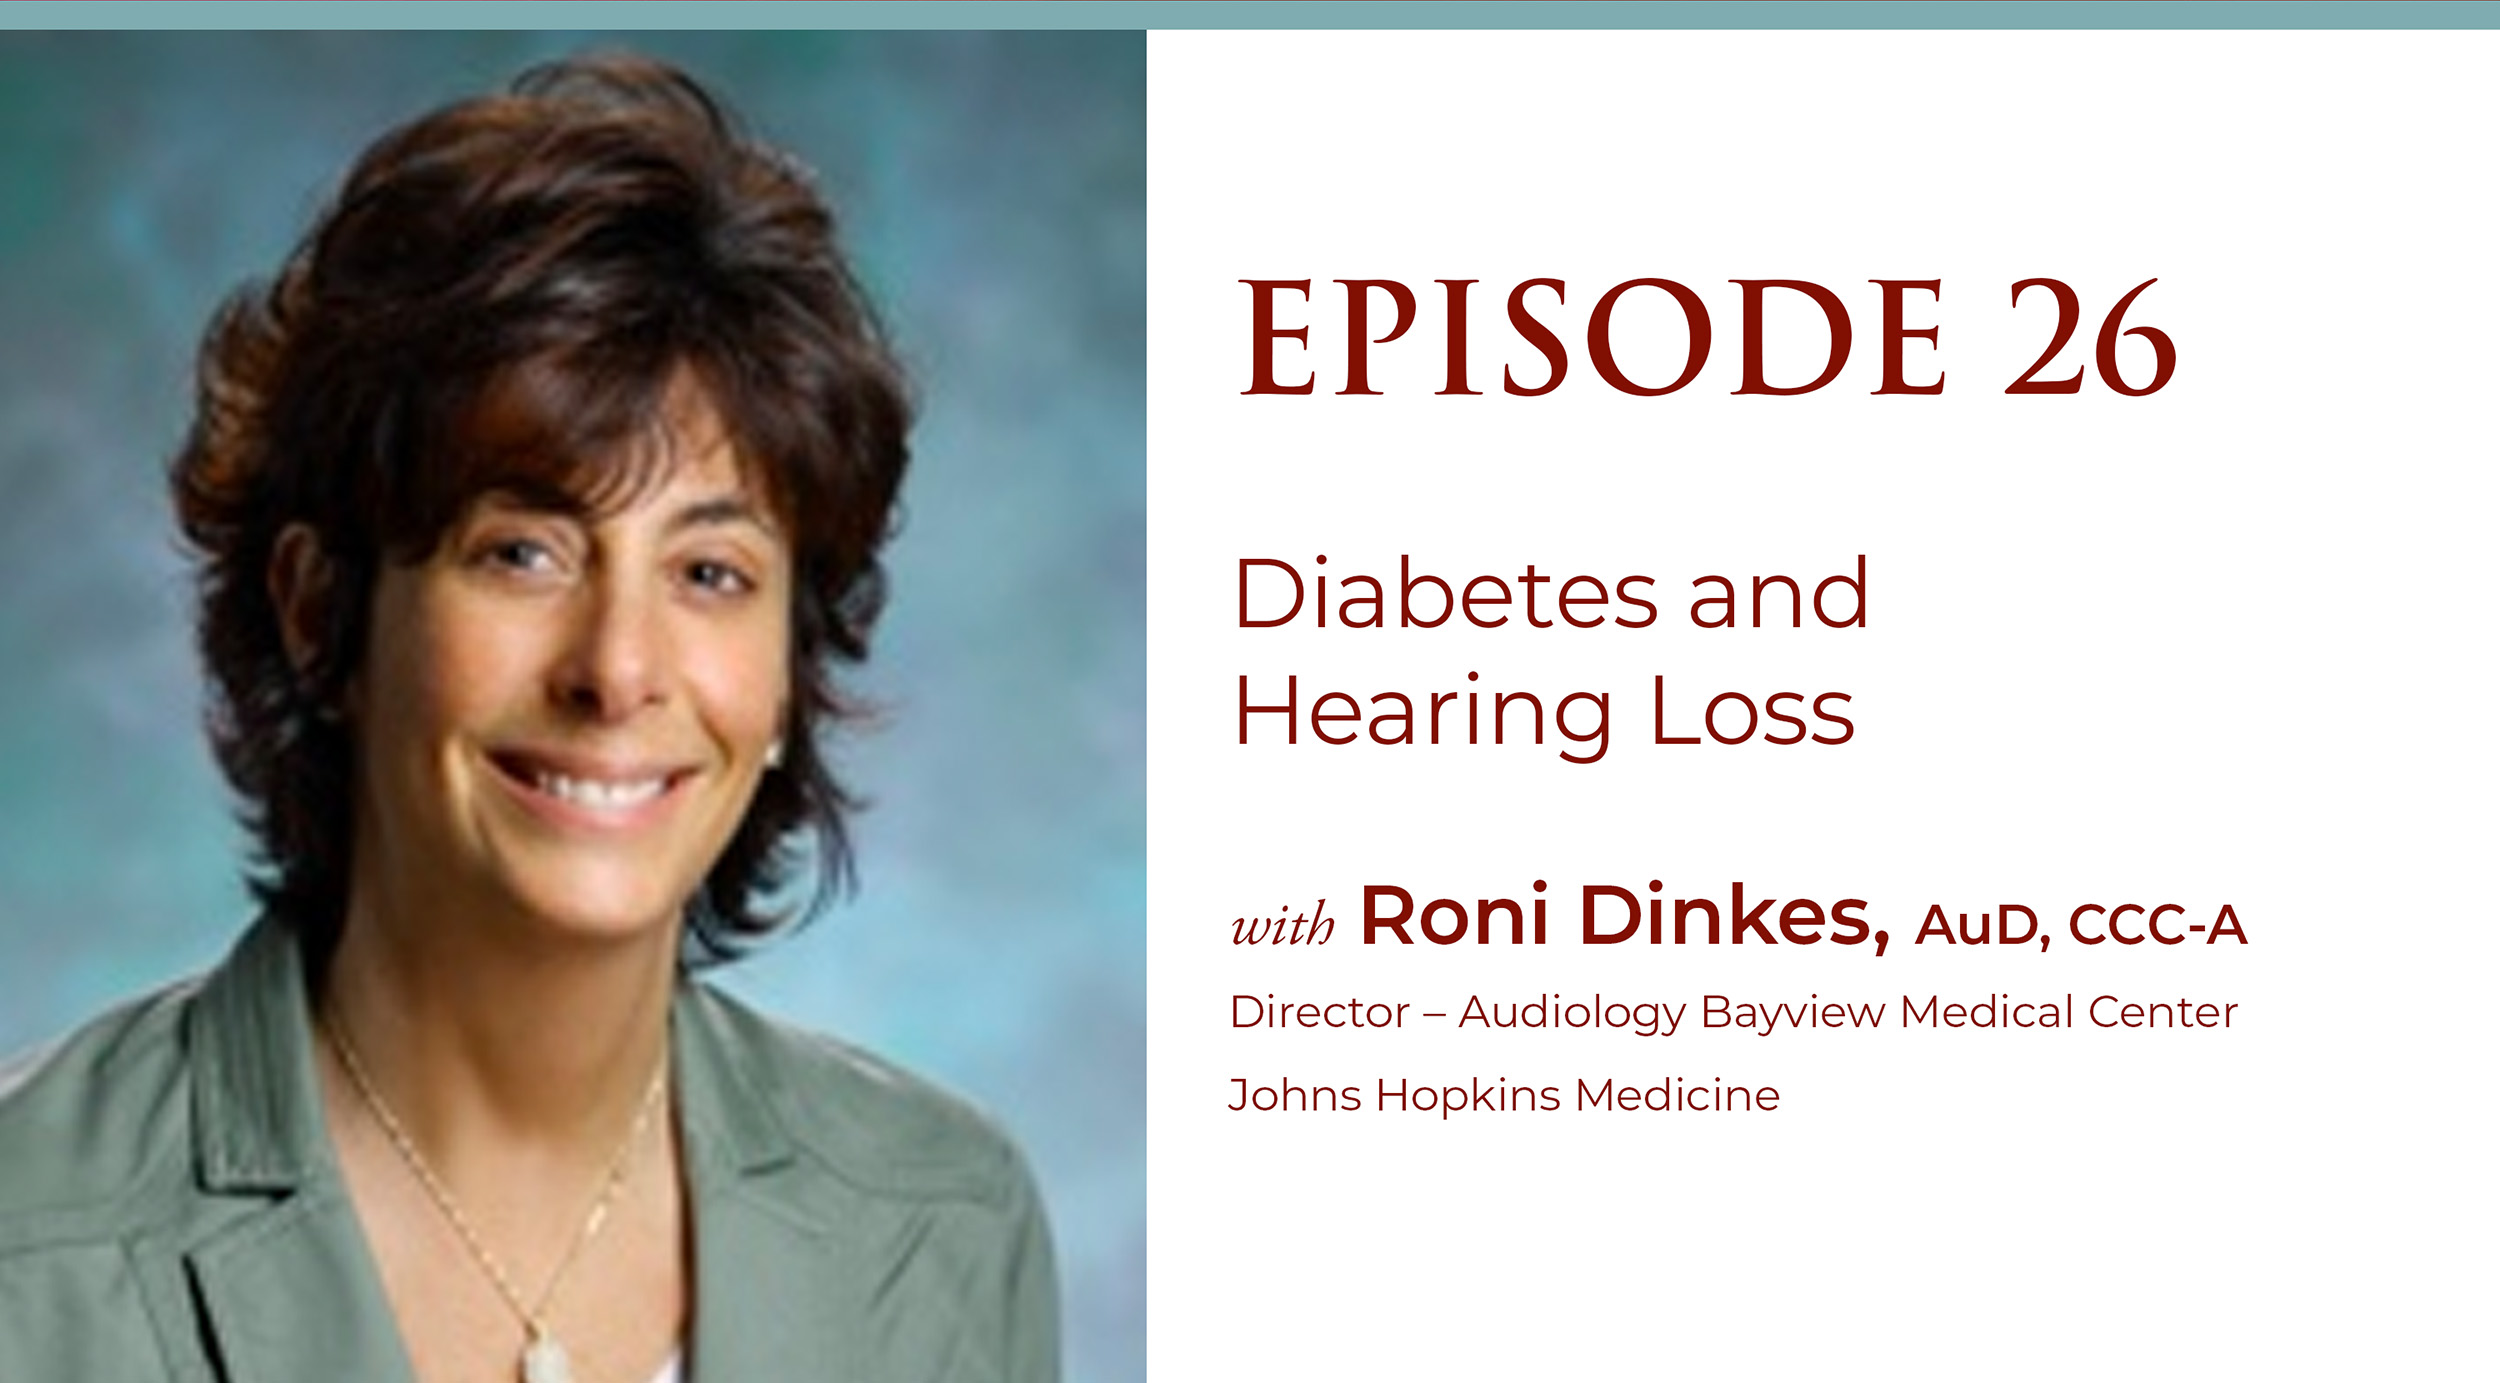 Episode 26: Diabetes and Hearing Loss